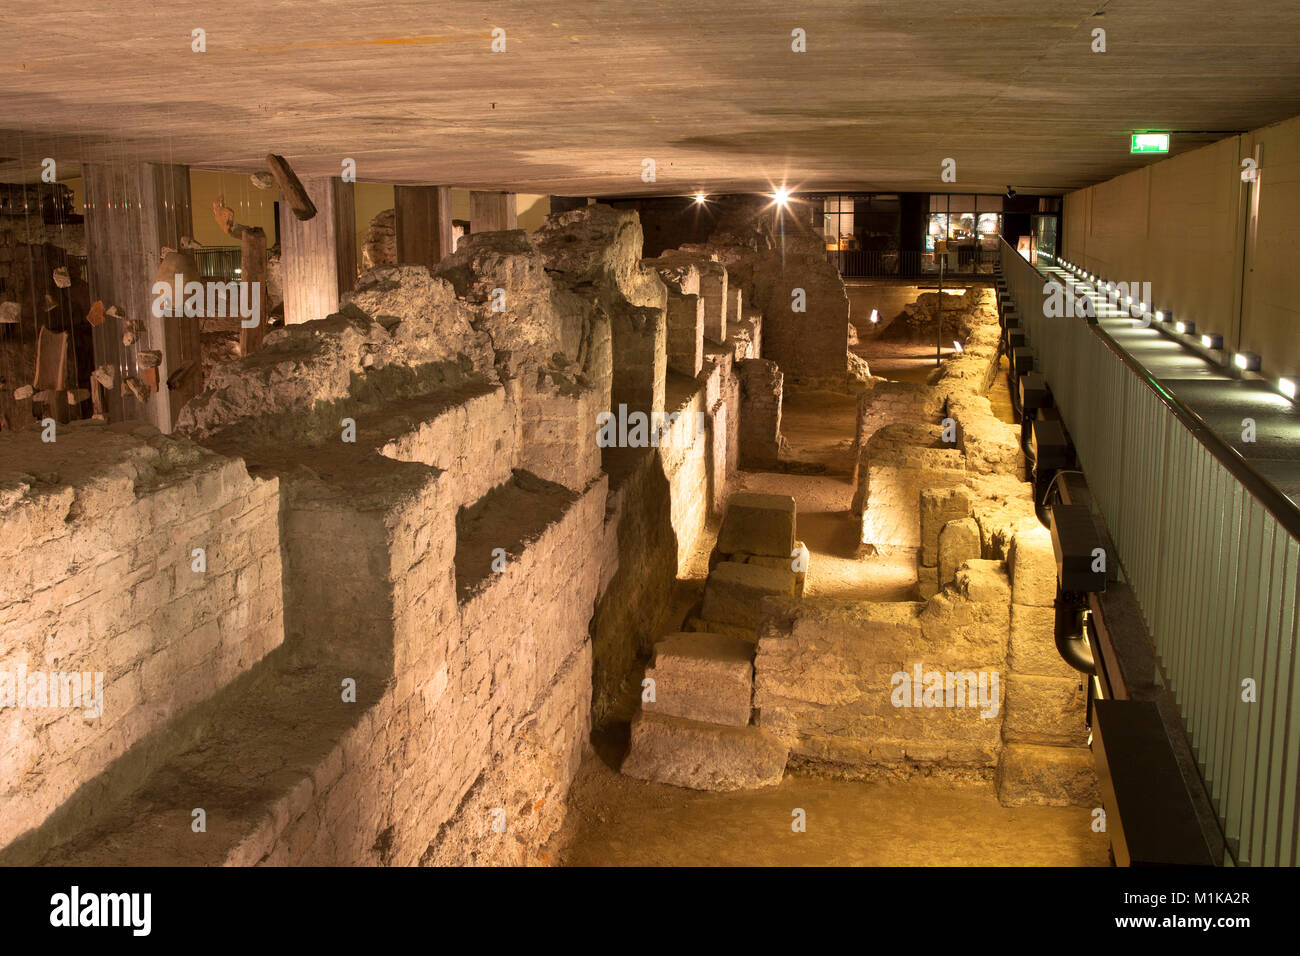 Germany, Cologne, the relics of the Praetorium. The Praetorium was the official residence or palace of the Roman governor in Germania Inferior. The Pr Stock Photo